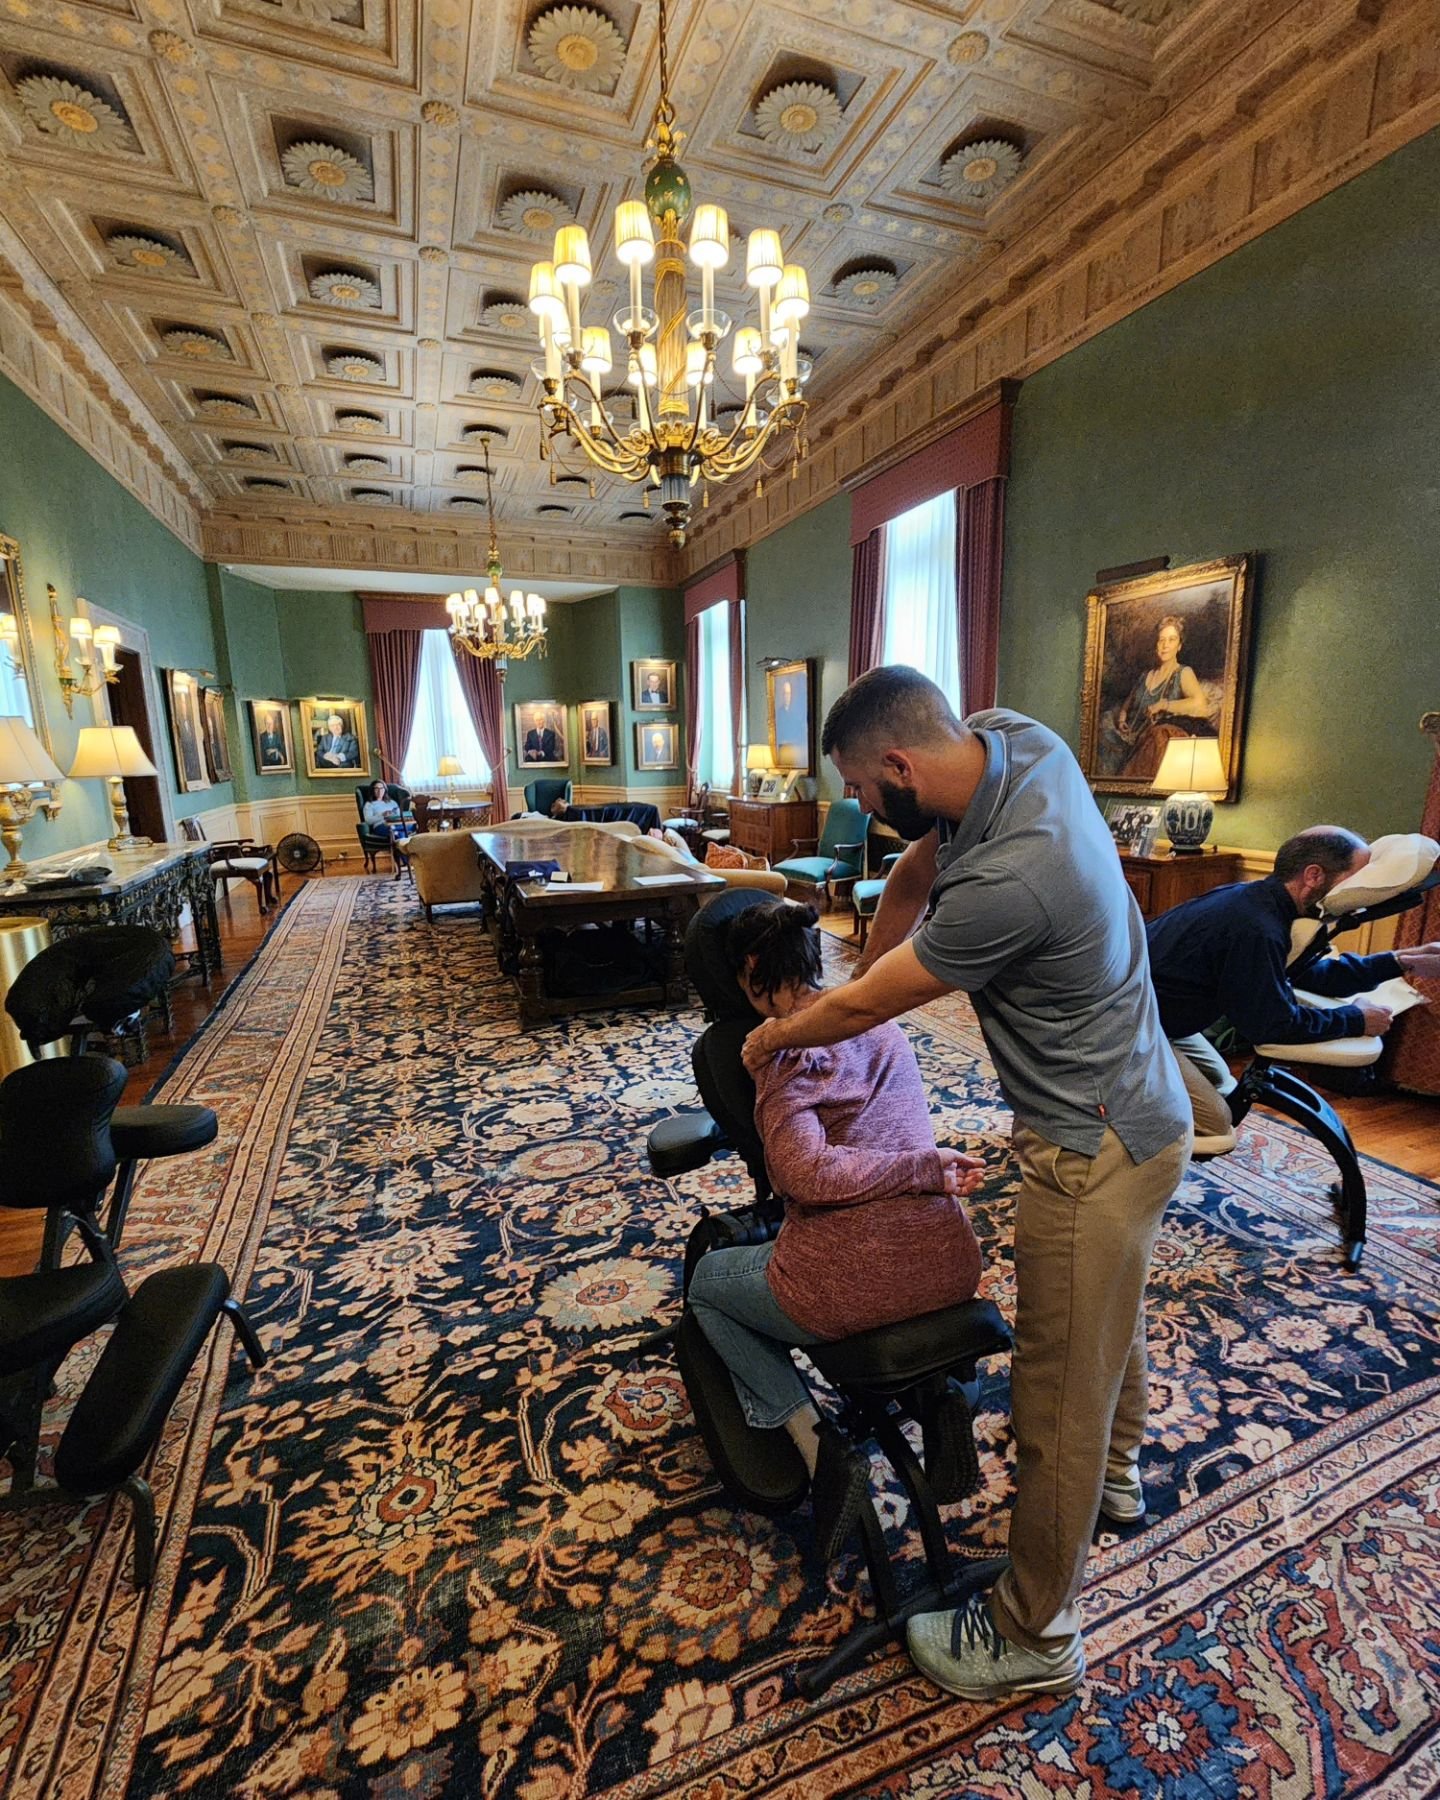 Yesterday we spent the day providing chair massages for the Cleveland Orchestra and Severance Hall staff for their annual wellness fair. This is the third year being invited to this event. It's always a pleasure to work with such wonderful people and